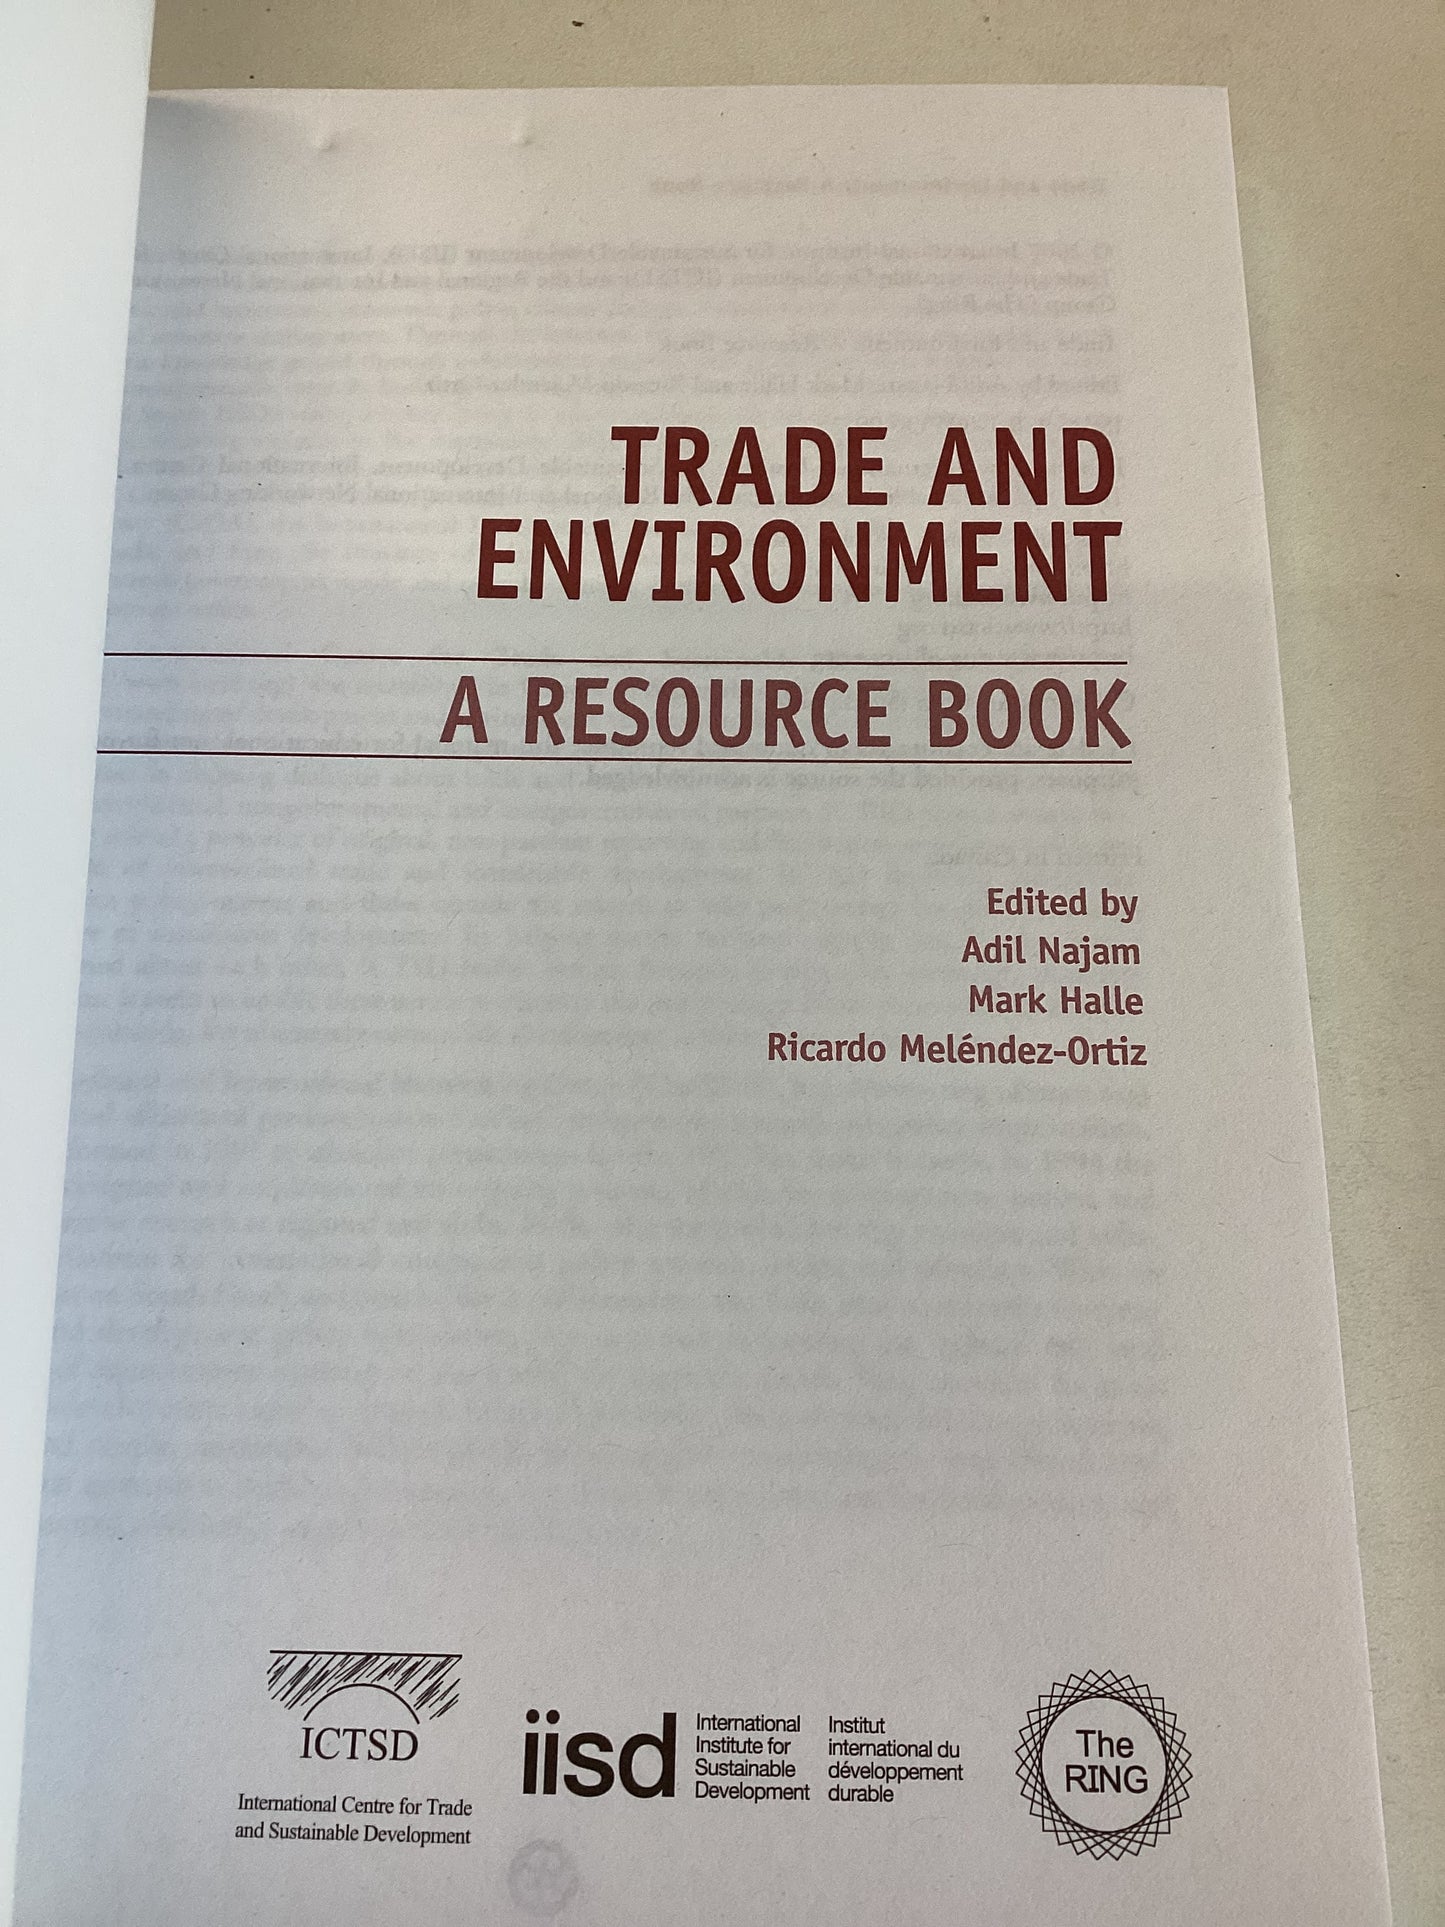 Trade and Environment A Resource Book Edited by Adil Najam, Mark Halle and Ricardo Melendez-ortiz